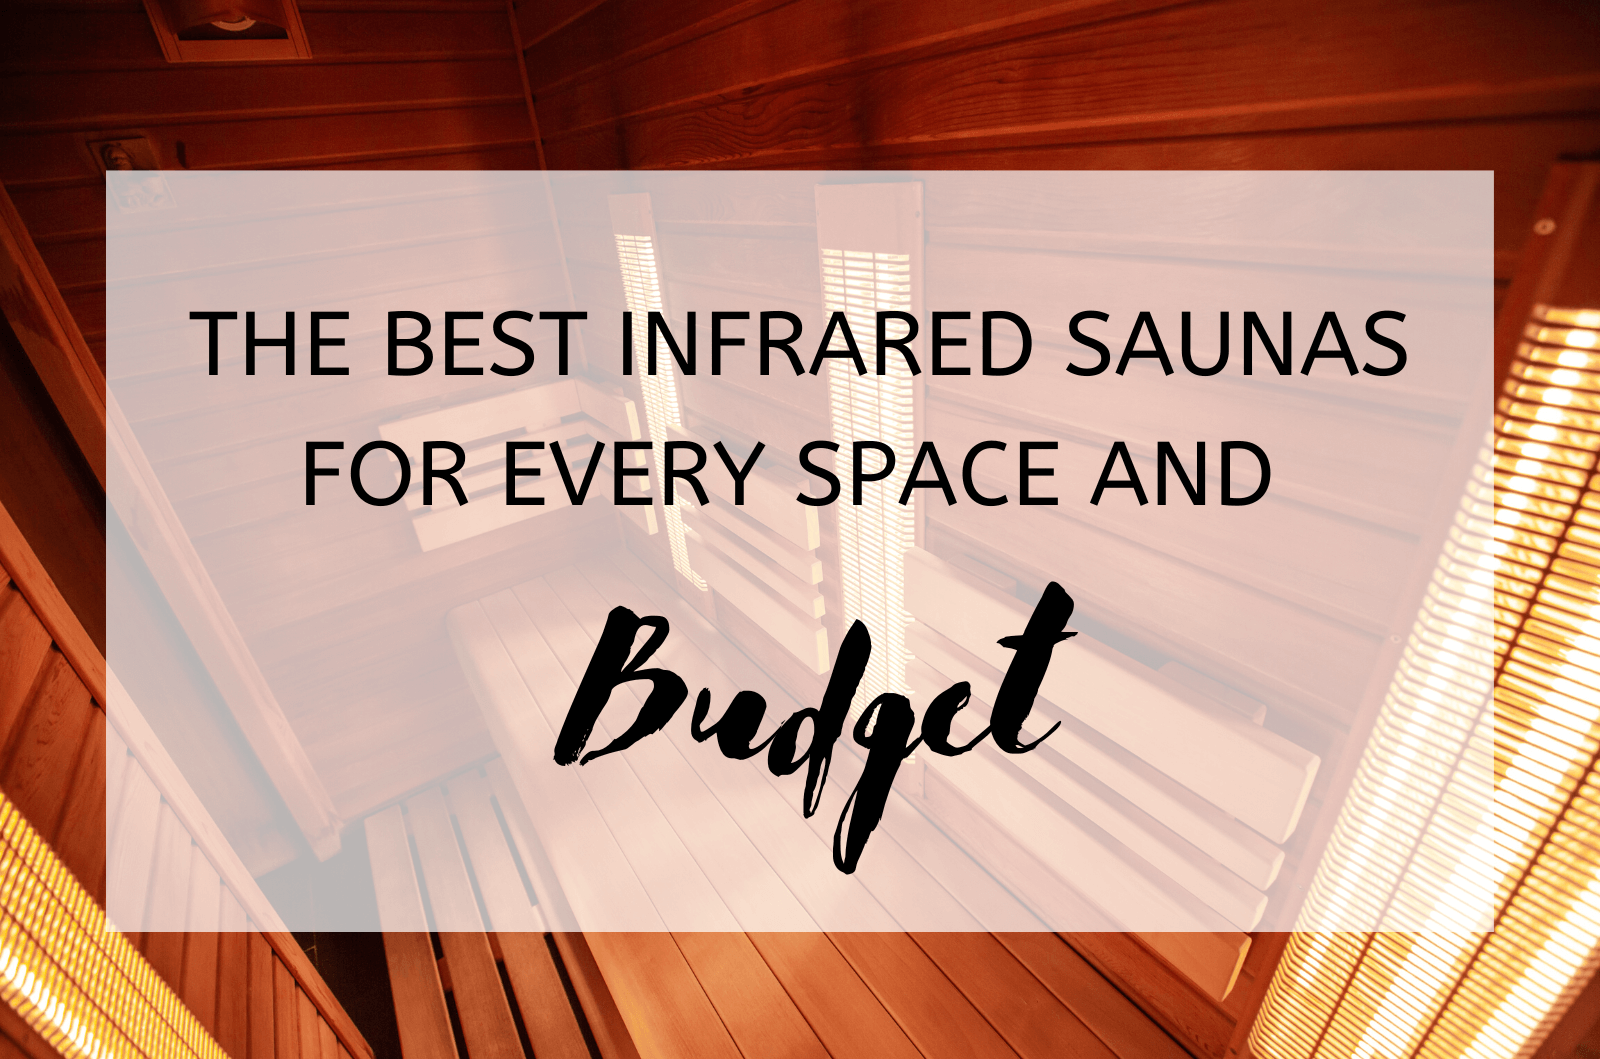 The Best Infrared Saunas For Every Space And Budget